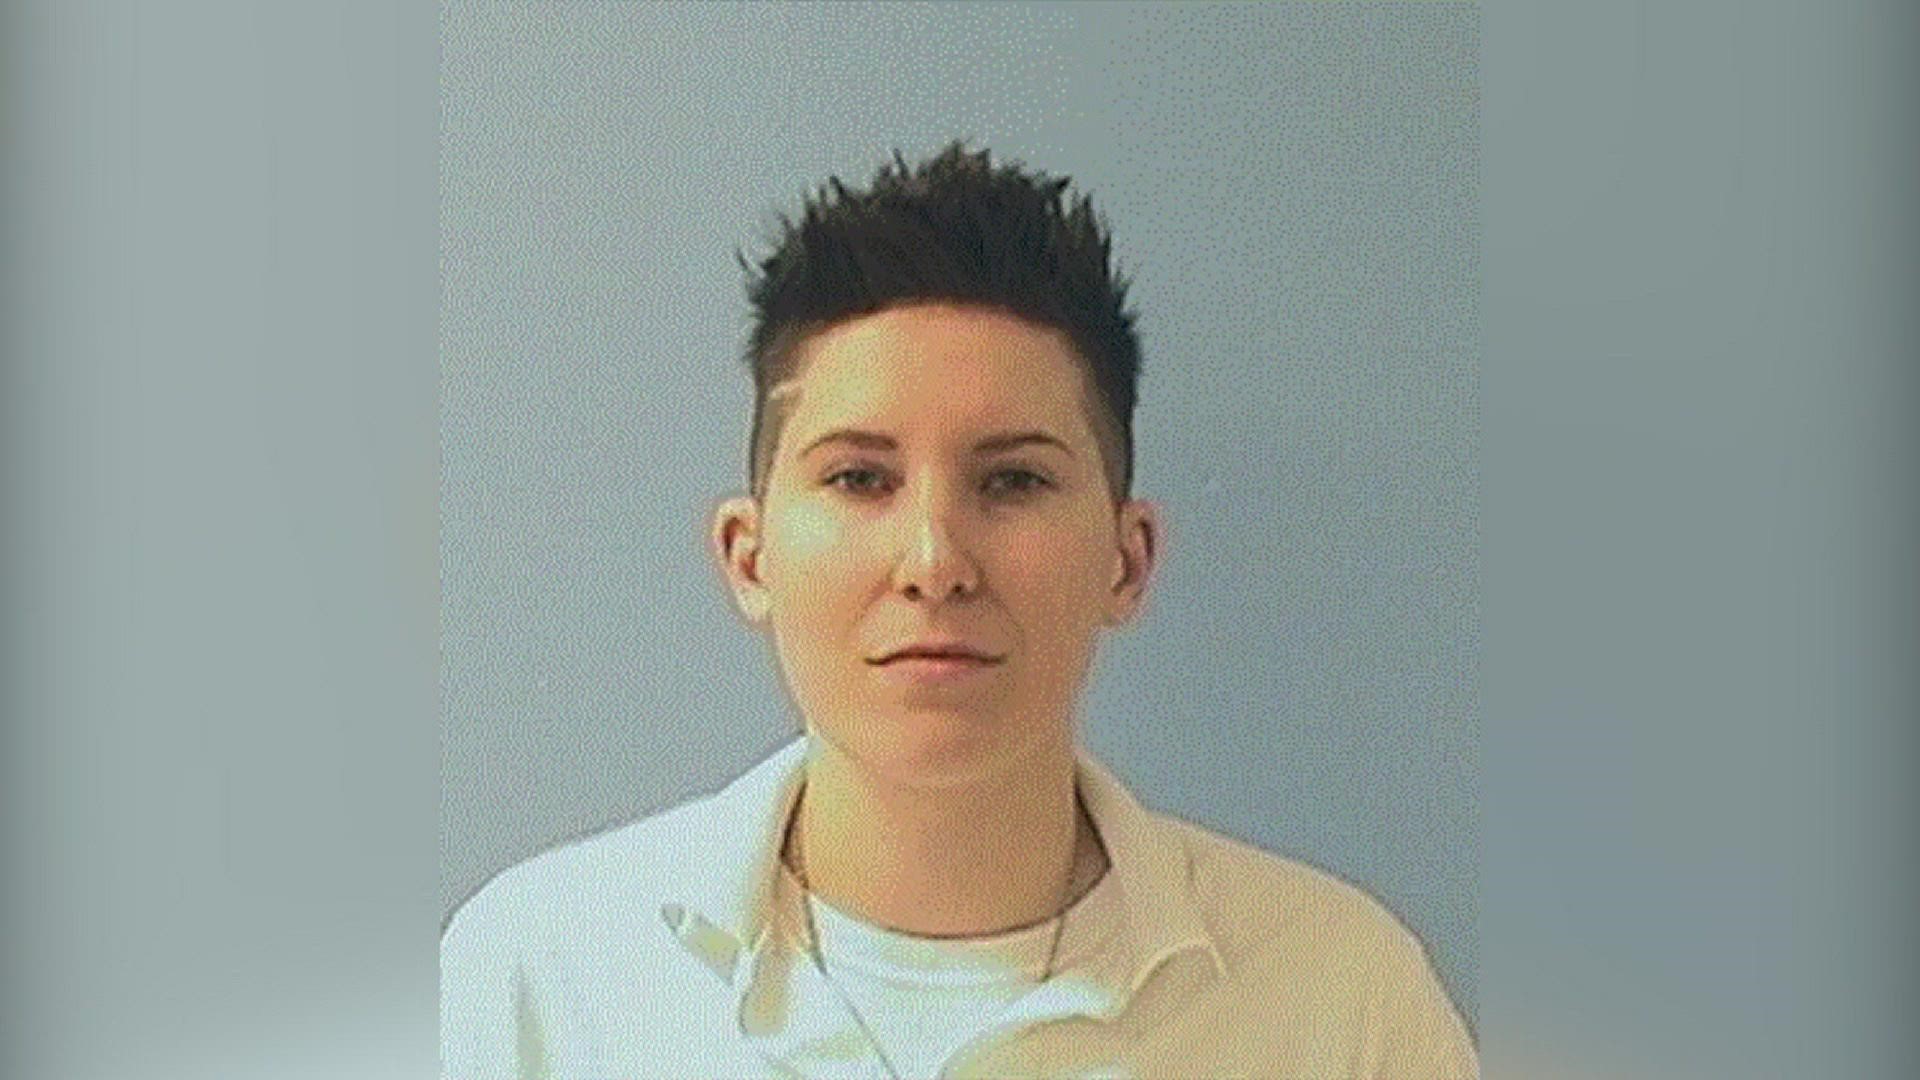 Sarah Kolb was convicted for her role in Adrianne Reynolds' death in 2005. Her petition for a pardoned or reduced sentence will be reviewed next month.